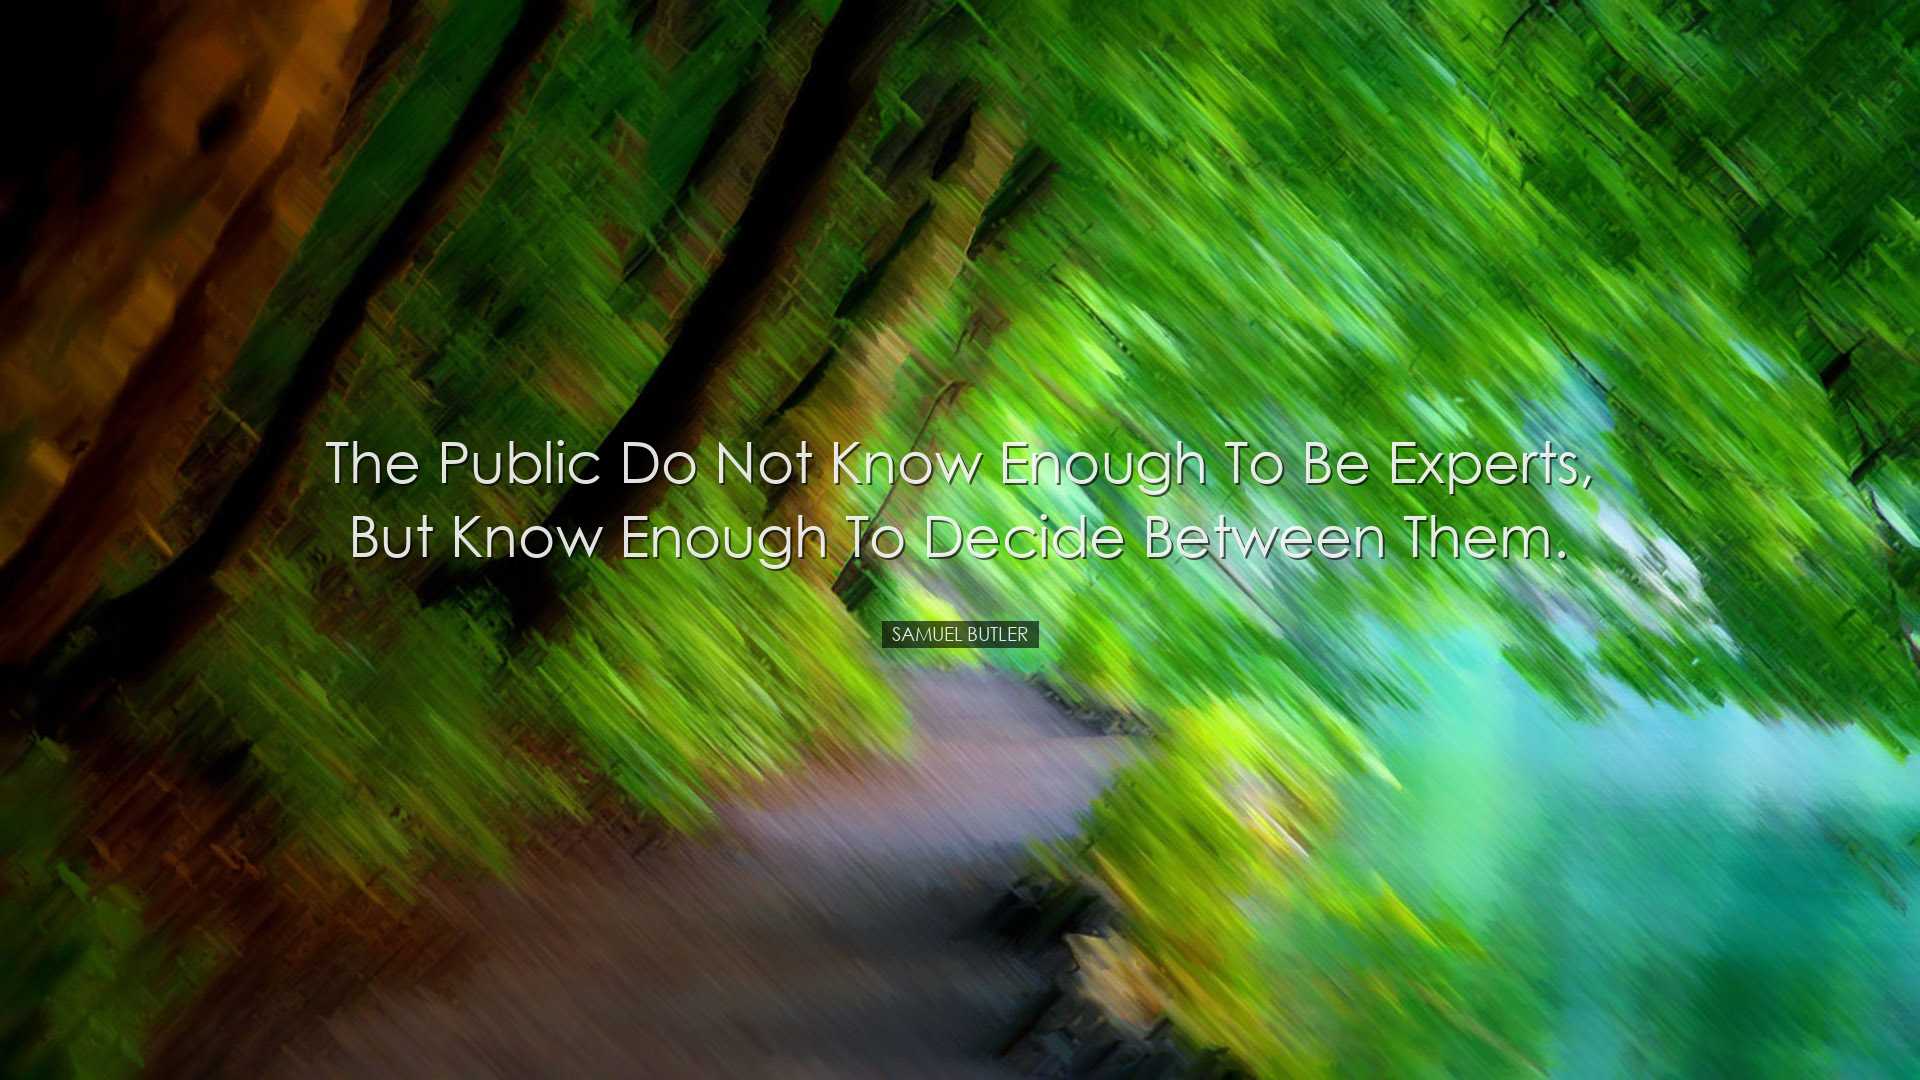 The public do not know enough to be experts, but know enough to de